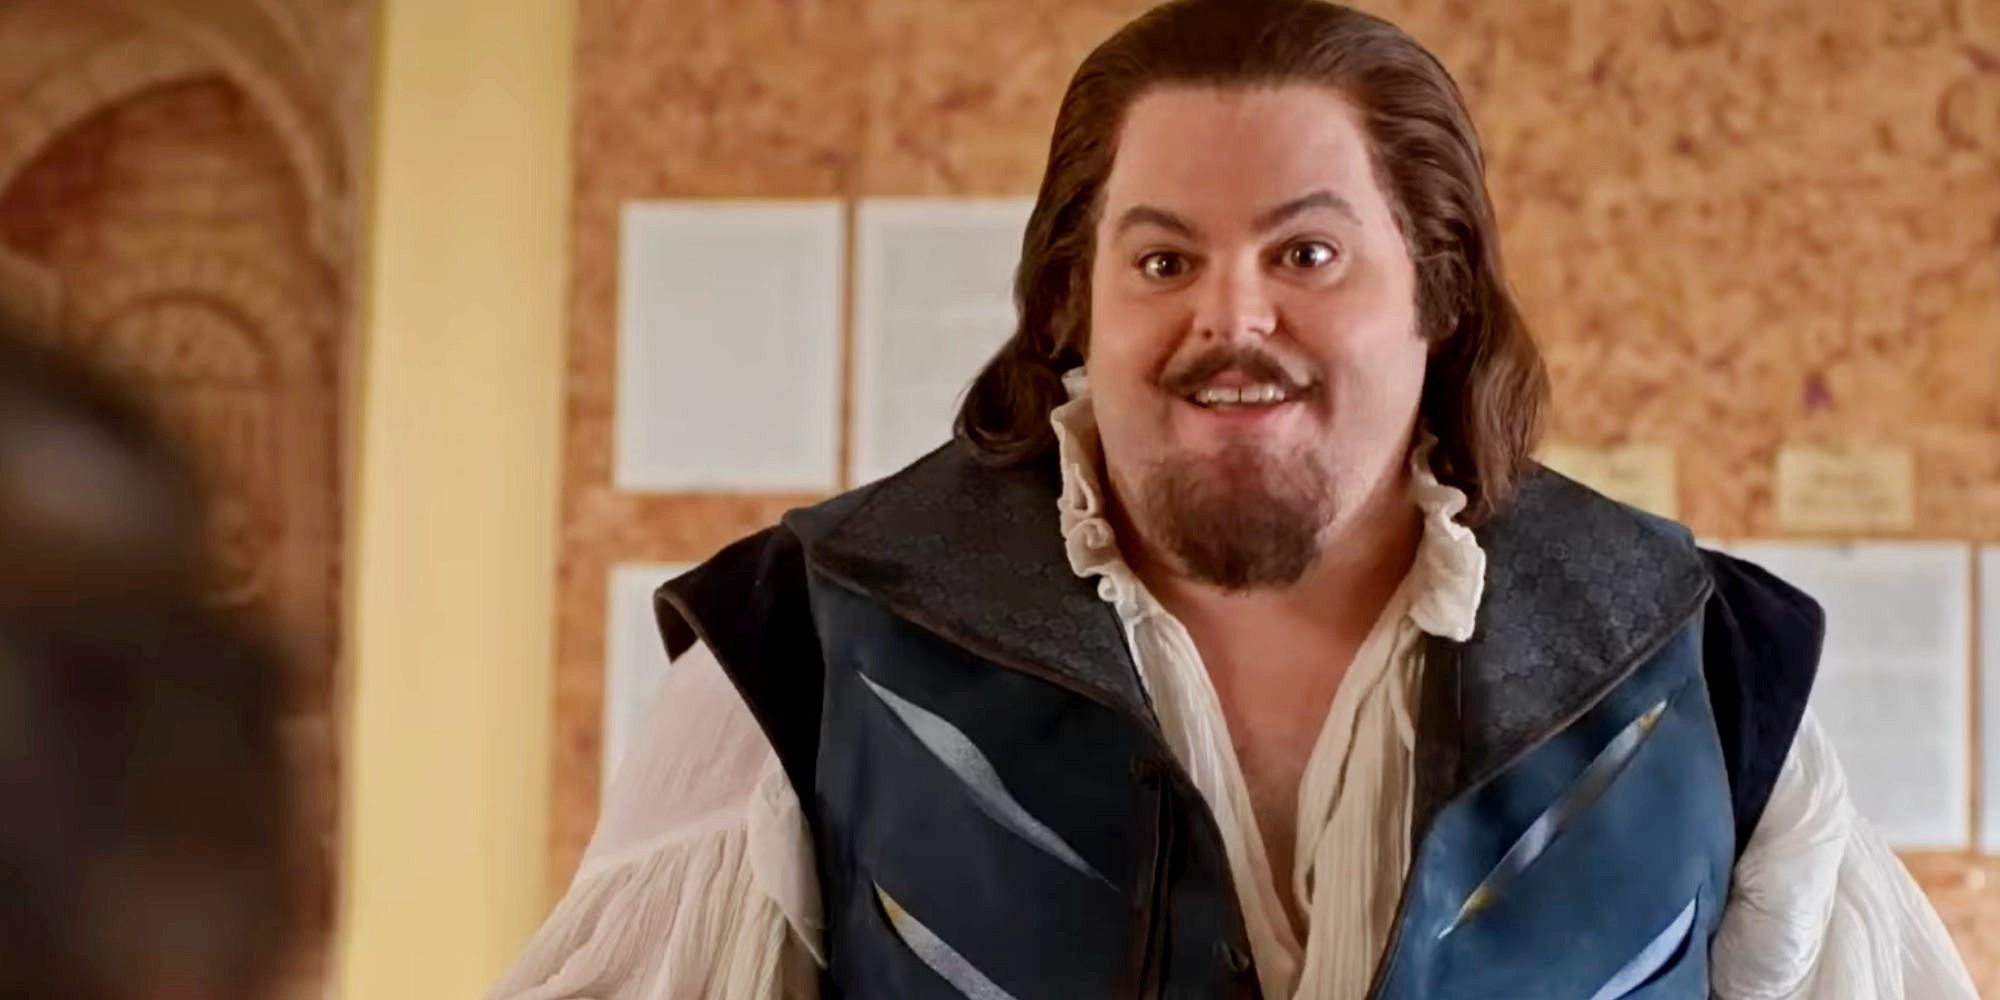 Josh Gad as William Shakespeare smiling in History of the World Part 2